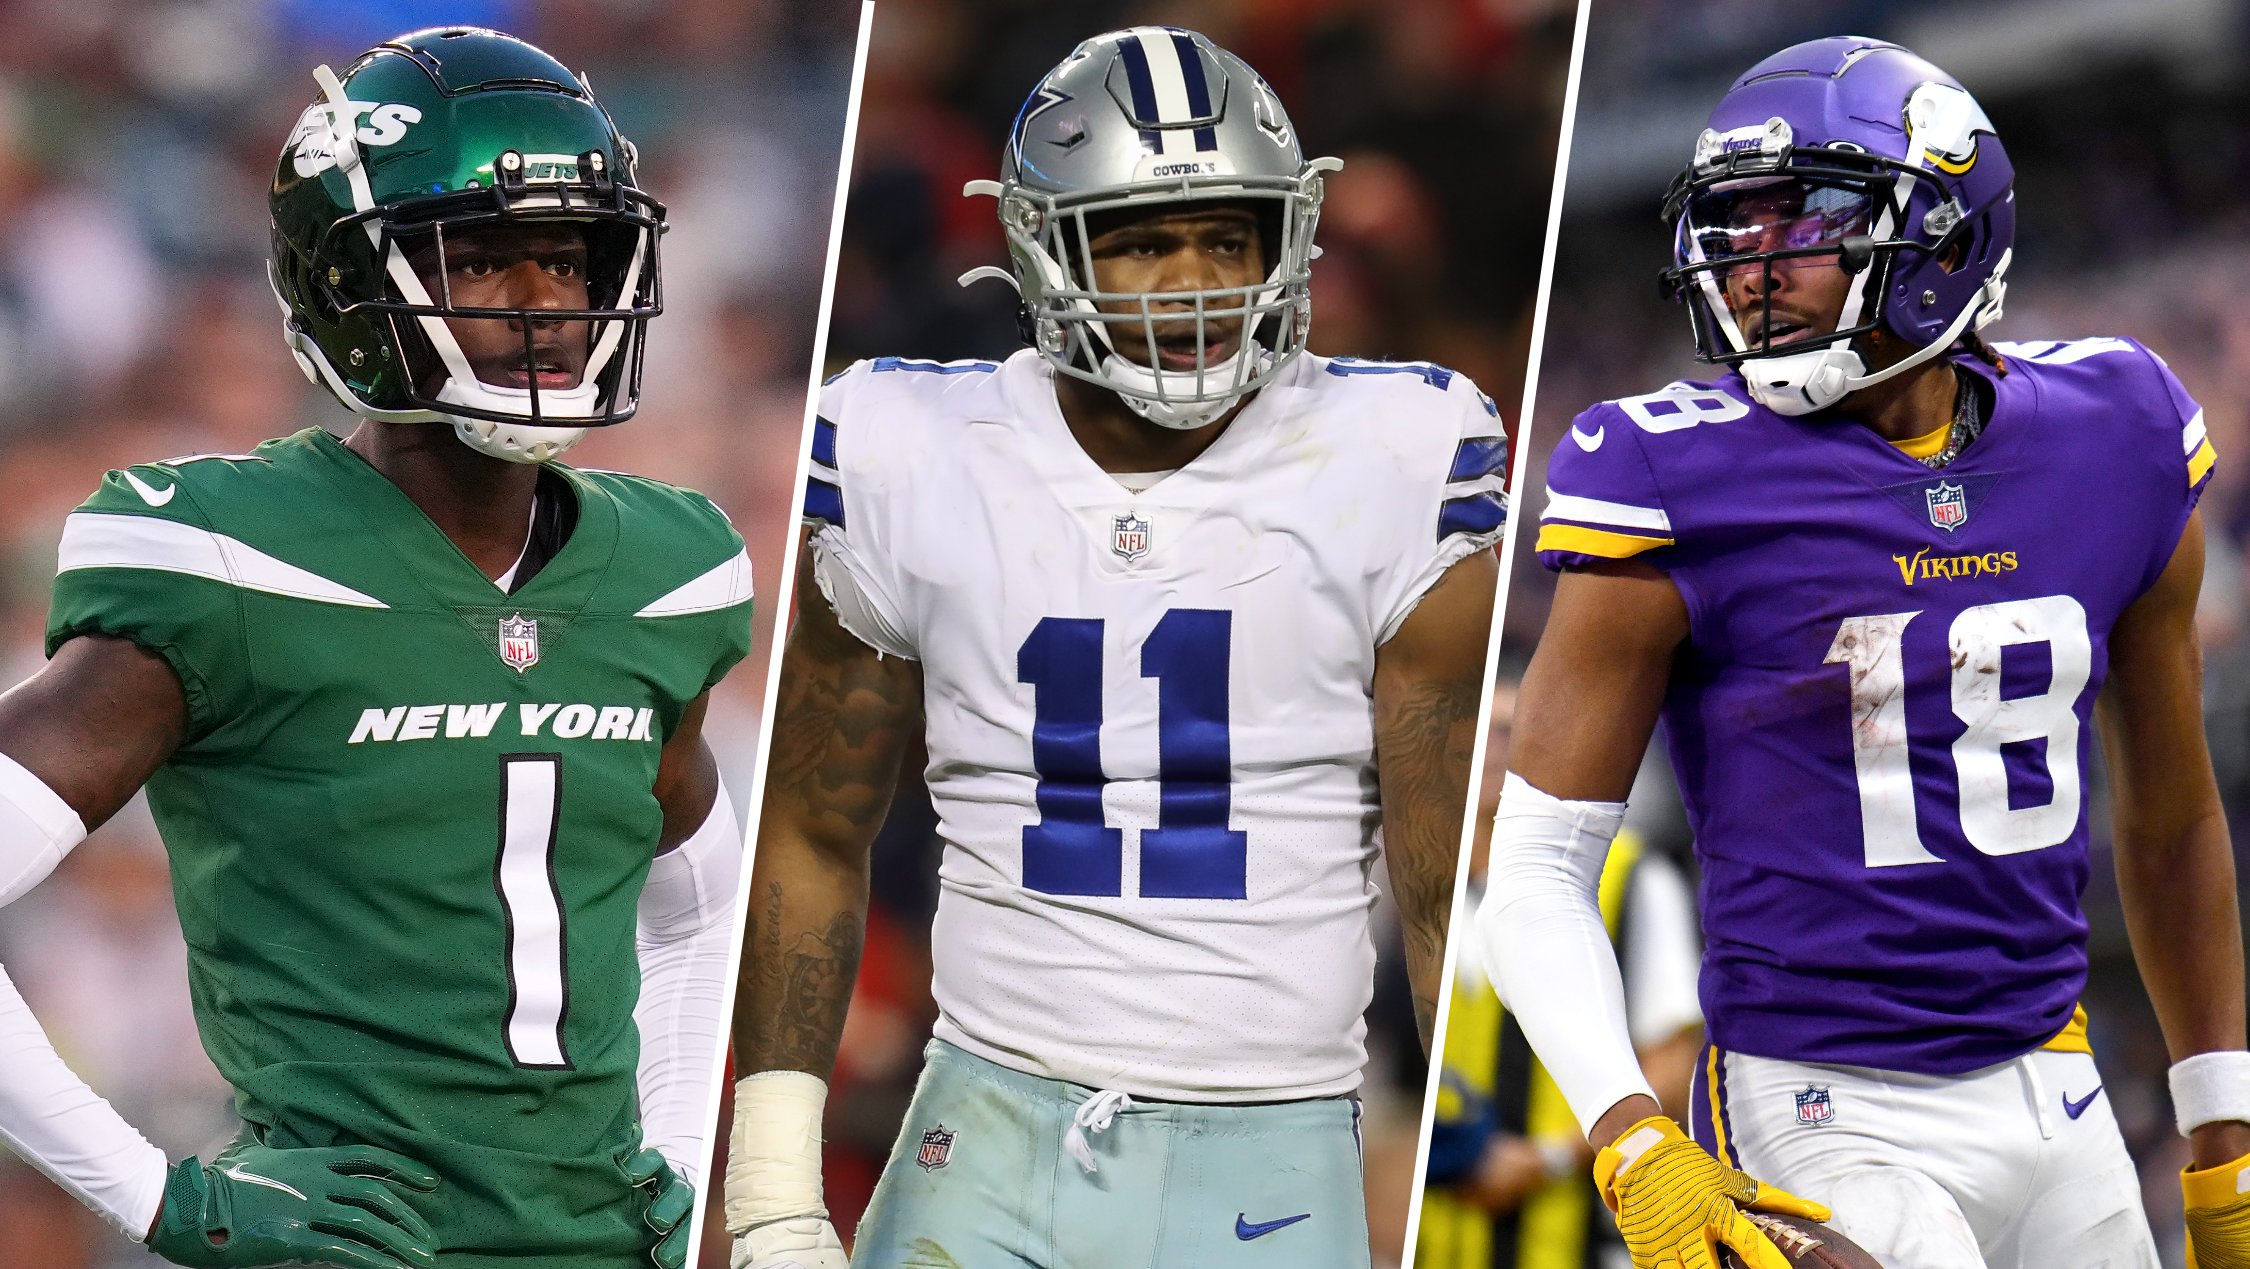 Ranking the Top 5 NFL Players Right Now - Pro Sports Outlook